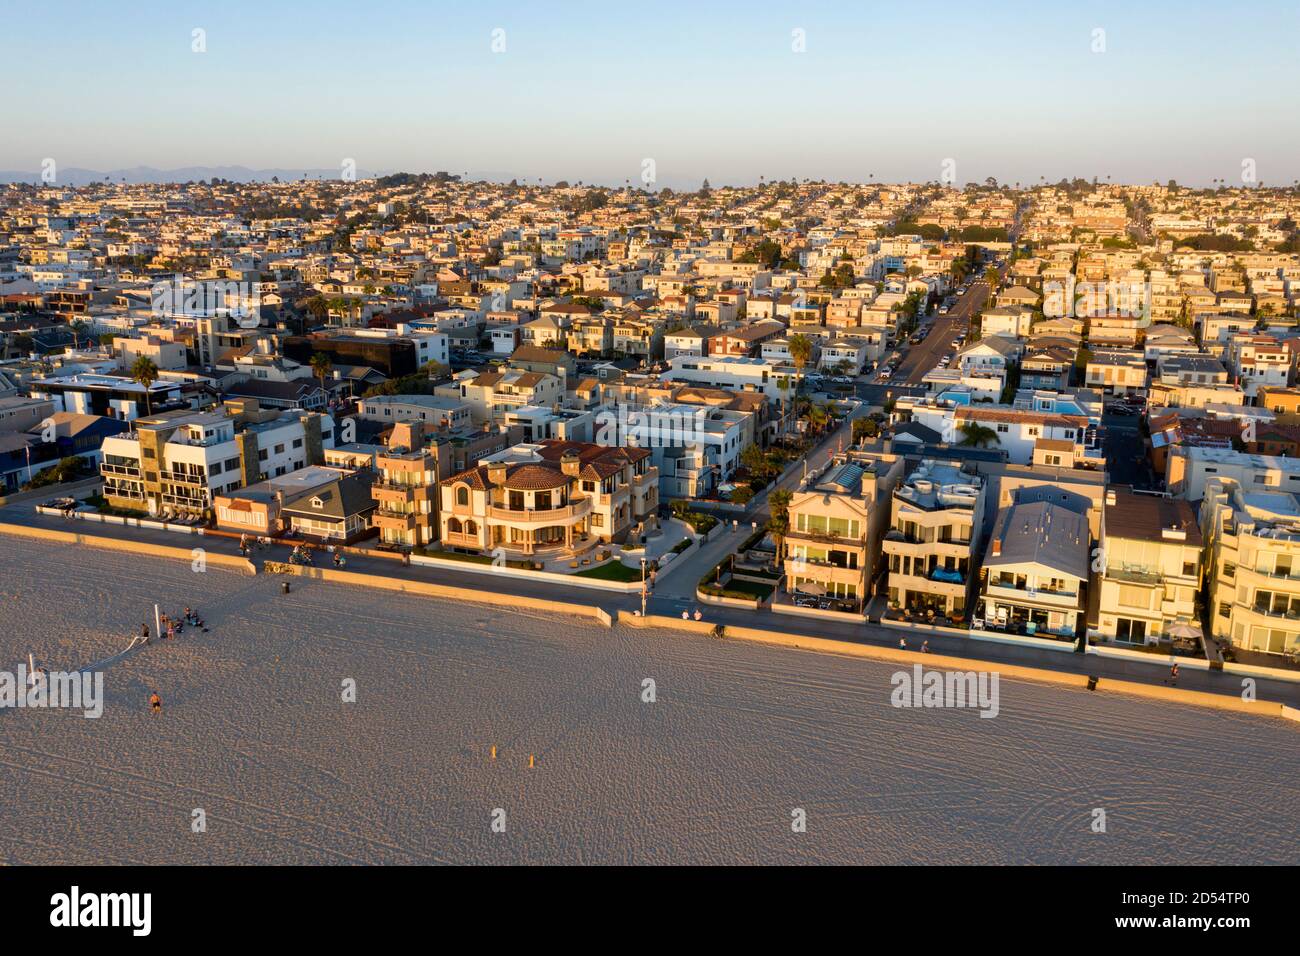 Aerial views of the wide sandy beach along the Southern California Coast at Hermosa Beach Stock Photo